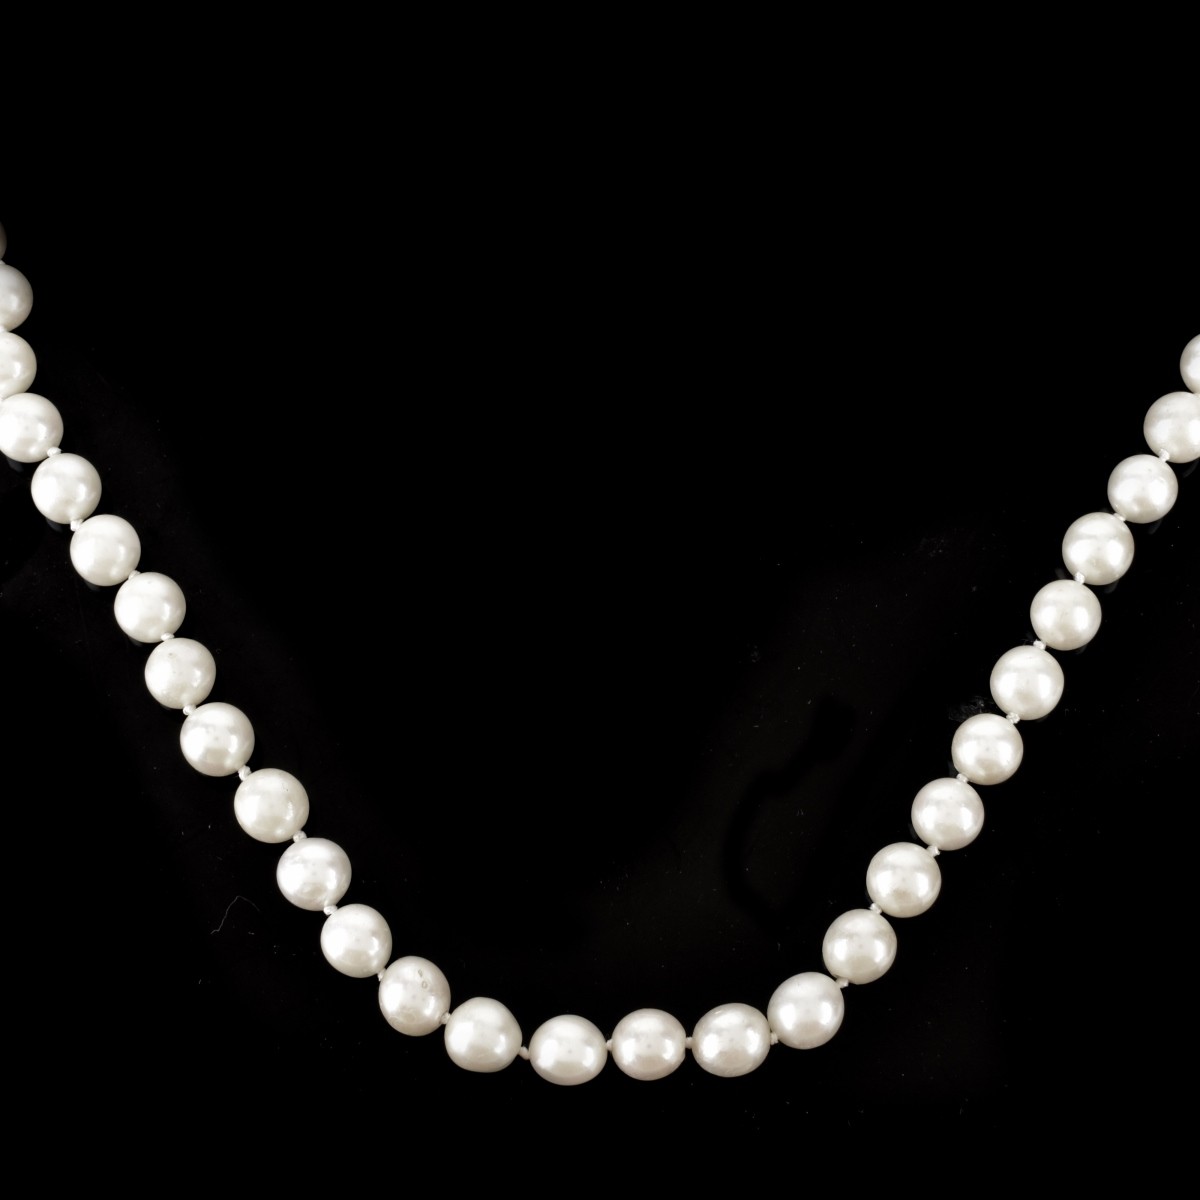 Two (2) Vintage 9.0mm Pearl Necklaces